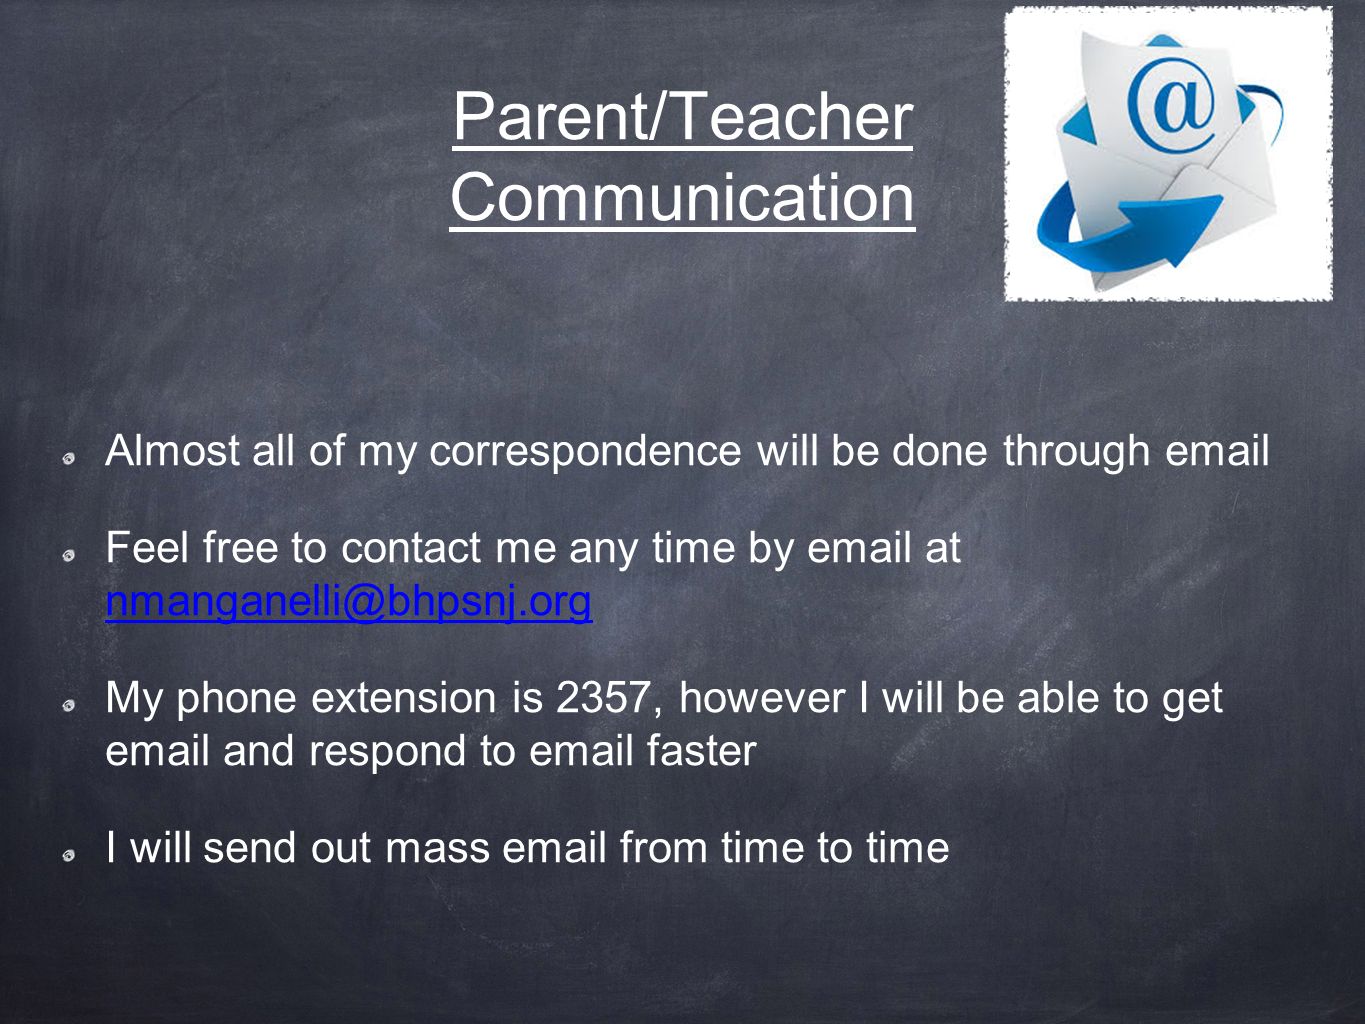 Parent/Teacher Communication Almost all of my correspondence will be done through  Feel free to contact me any time by  at  My phone extension is 2357, however I will be able to get  and respond to  faster I will send out mass  from time to time